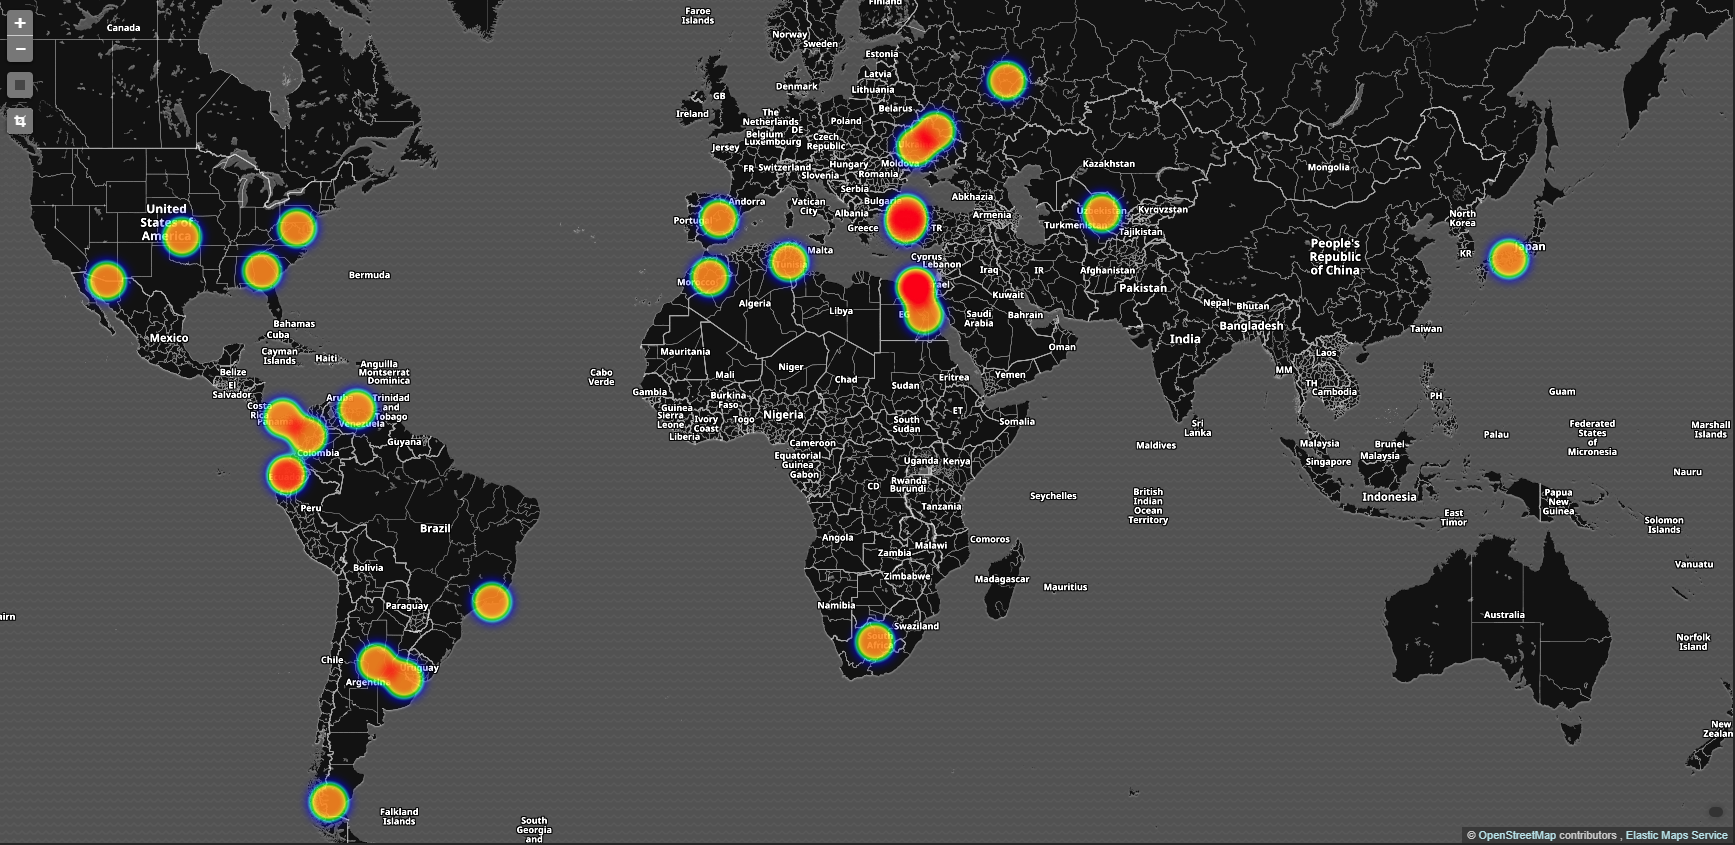 Huawei Botnet attempted infection map